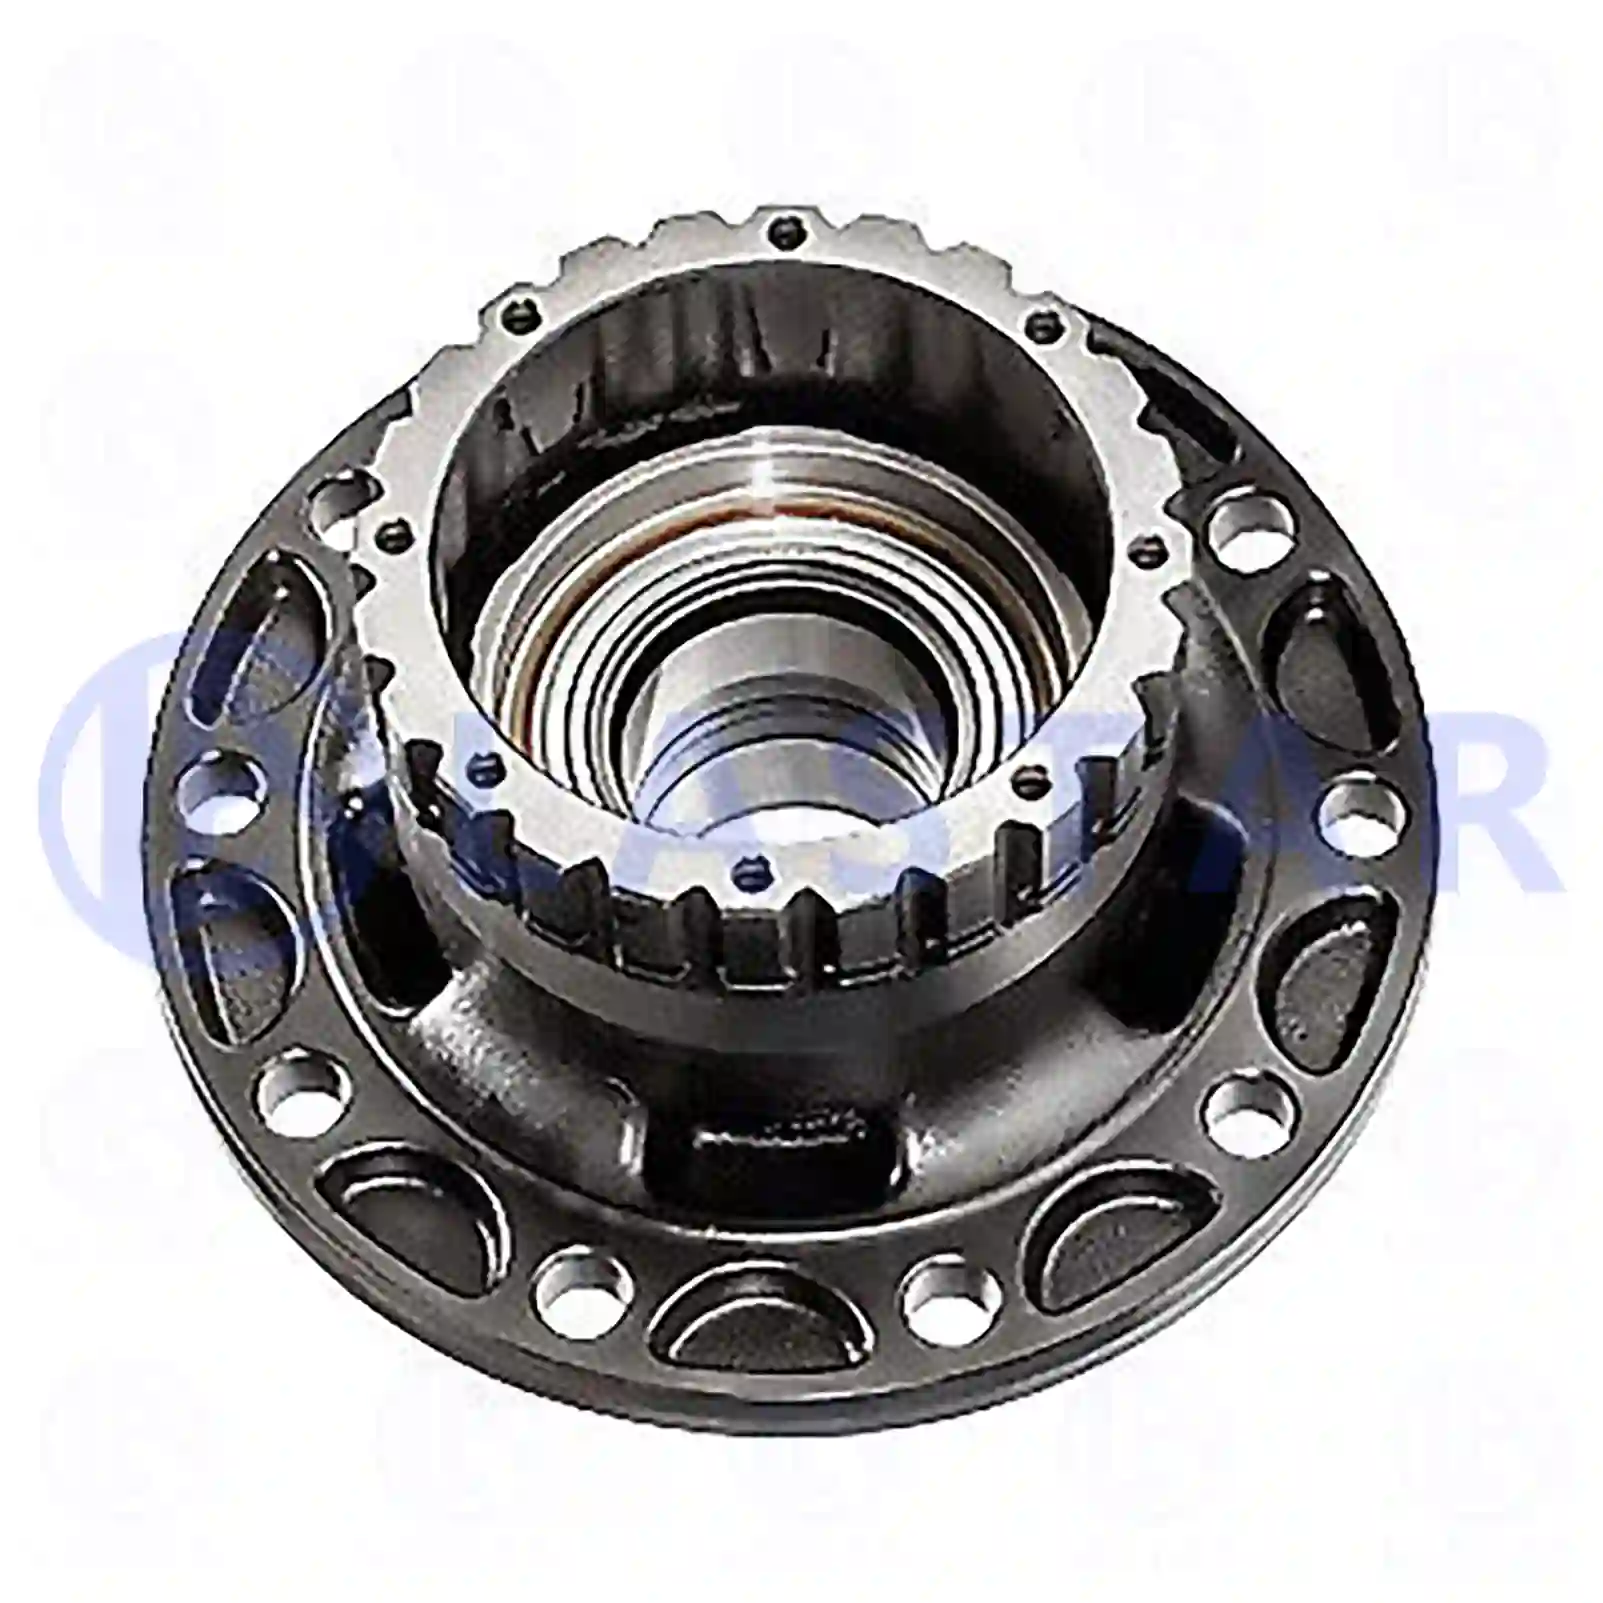 Wheel hub, with bearing, 77726680, 20516966S, 3092720S, 3988833S, 85104298S, 85105696S, ZG30204-0008, , ||  77726680 Lastar Spare Part | Truck Spare Parts, Auotomotive Spare Parts Wheel hub, with bearing, 77726680, 20516966S, 3092720S, 3988833S, 85104298S, 85105696S, ZG30204-0008, , ||  77726680 Lastar Spare Part | Truck Spare Parts, Auotomotive Spare Parts